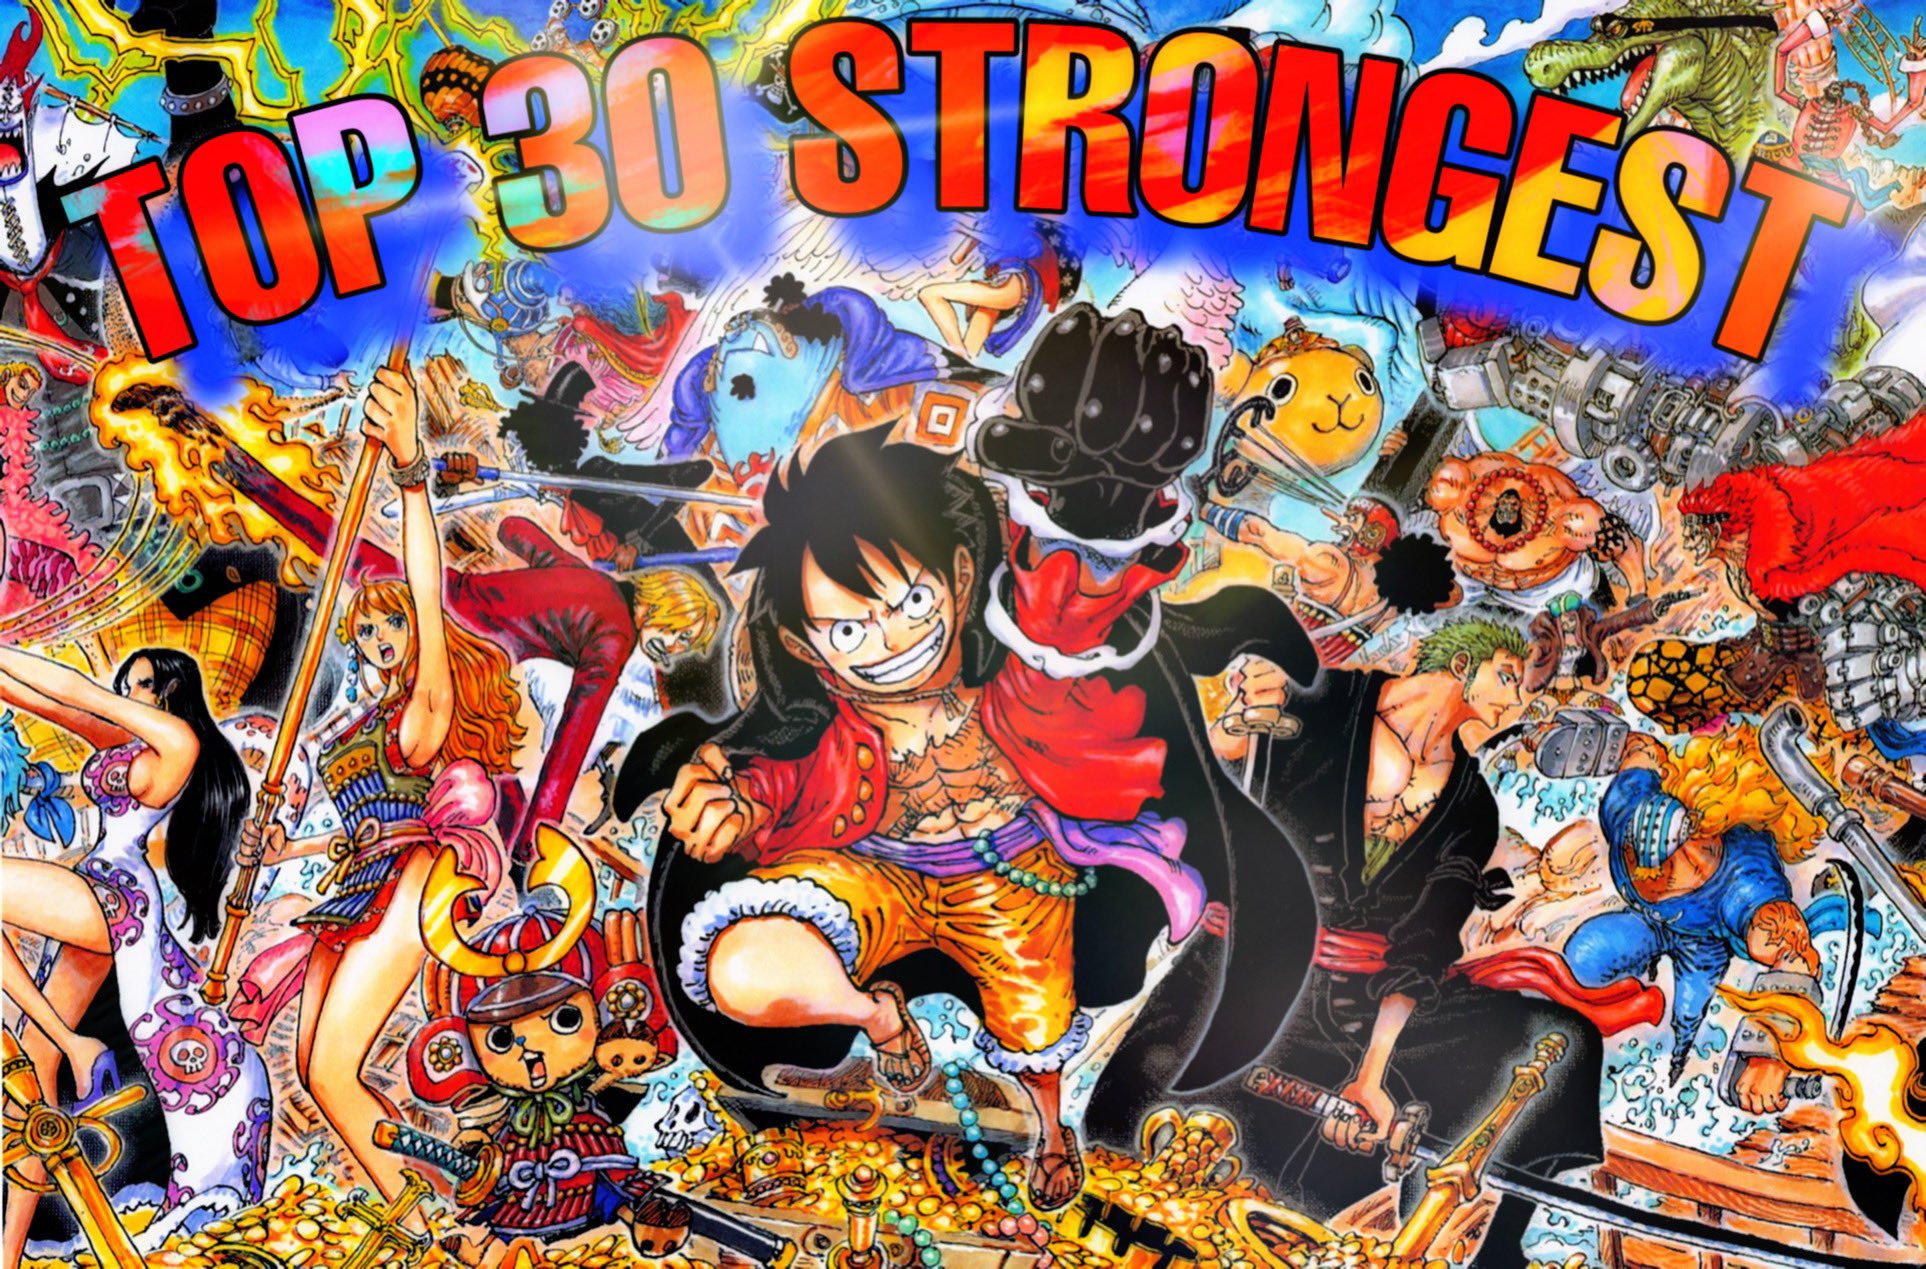 Strongest One Piece Characters